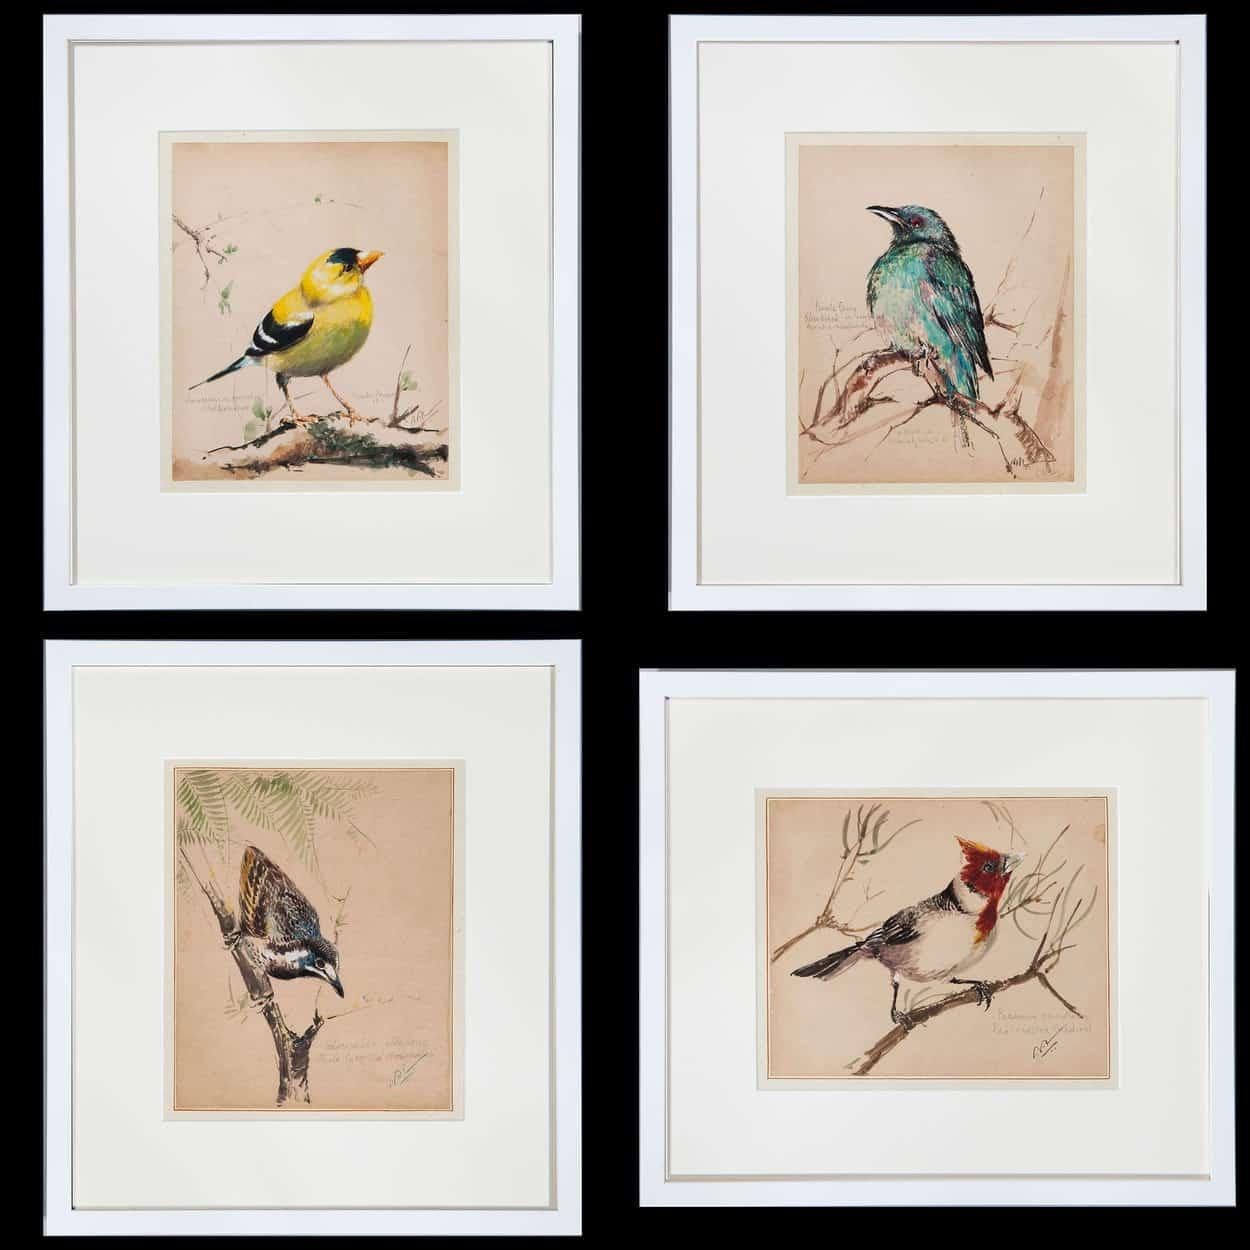 A set of 12 watercolors of exotic birds. Each bears a pencil manuscript inscription which in some cases may be wrong and some contain some misspellings but nonetheless record a period of work between 1919 and 1932. The birds come from all-over the